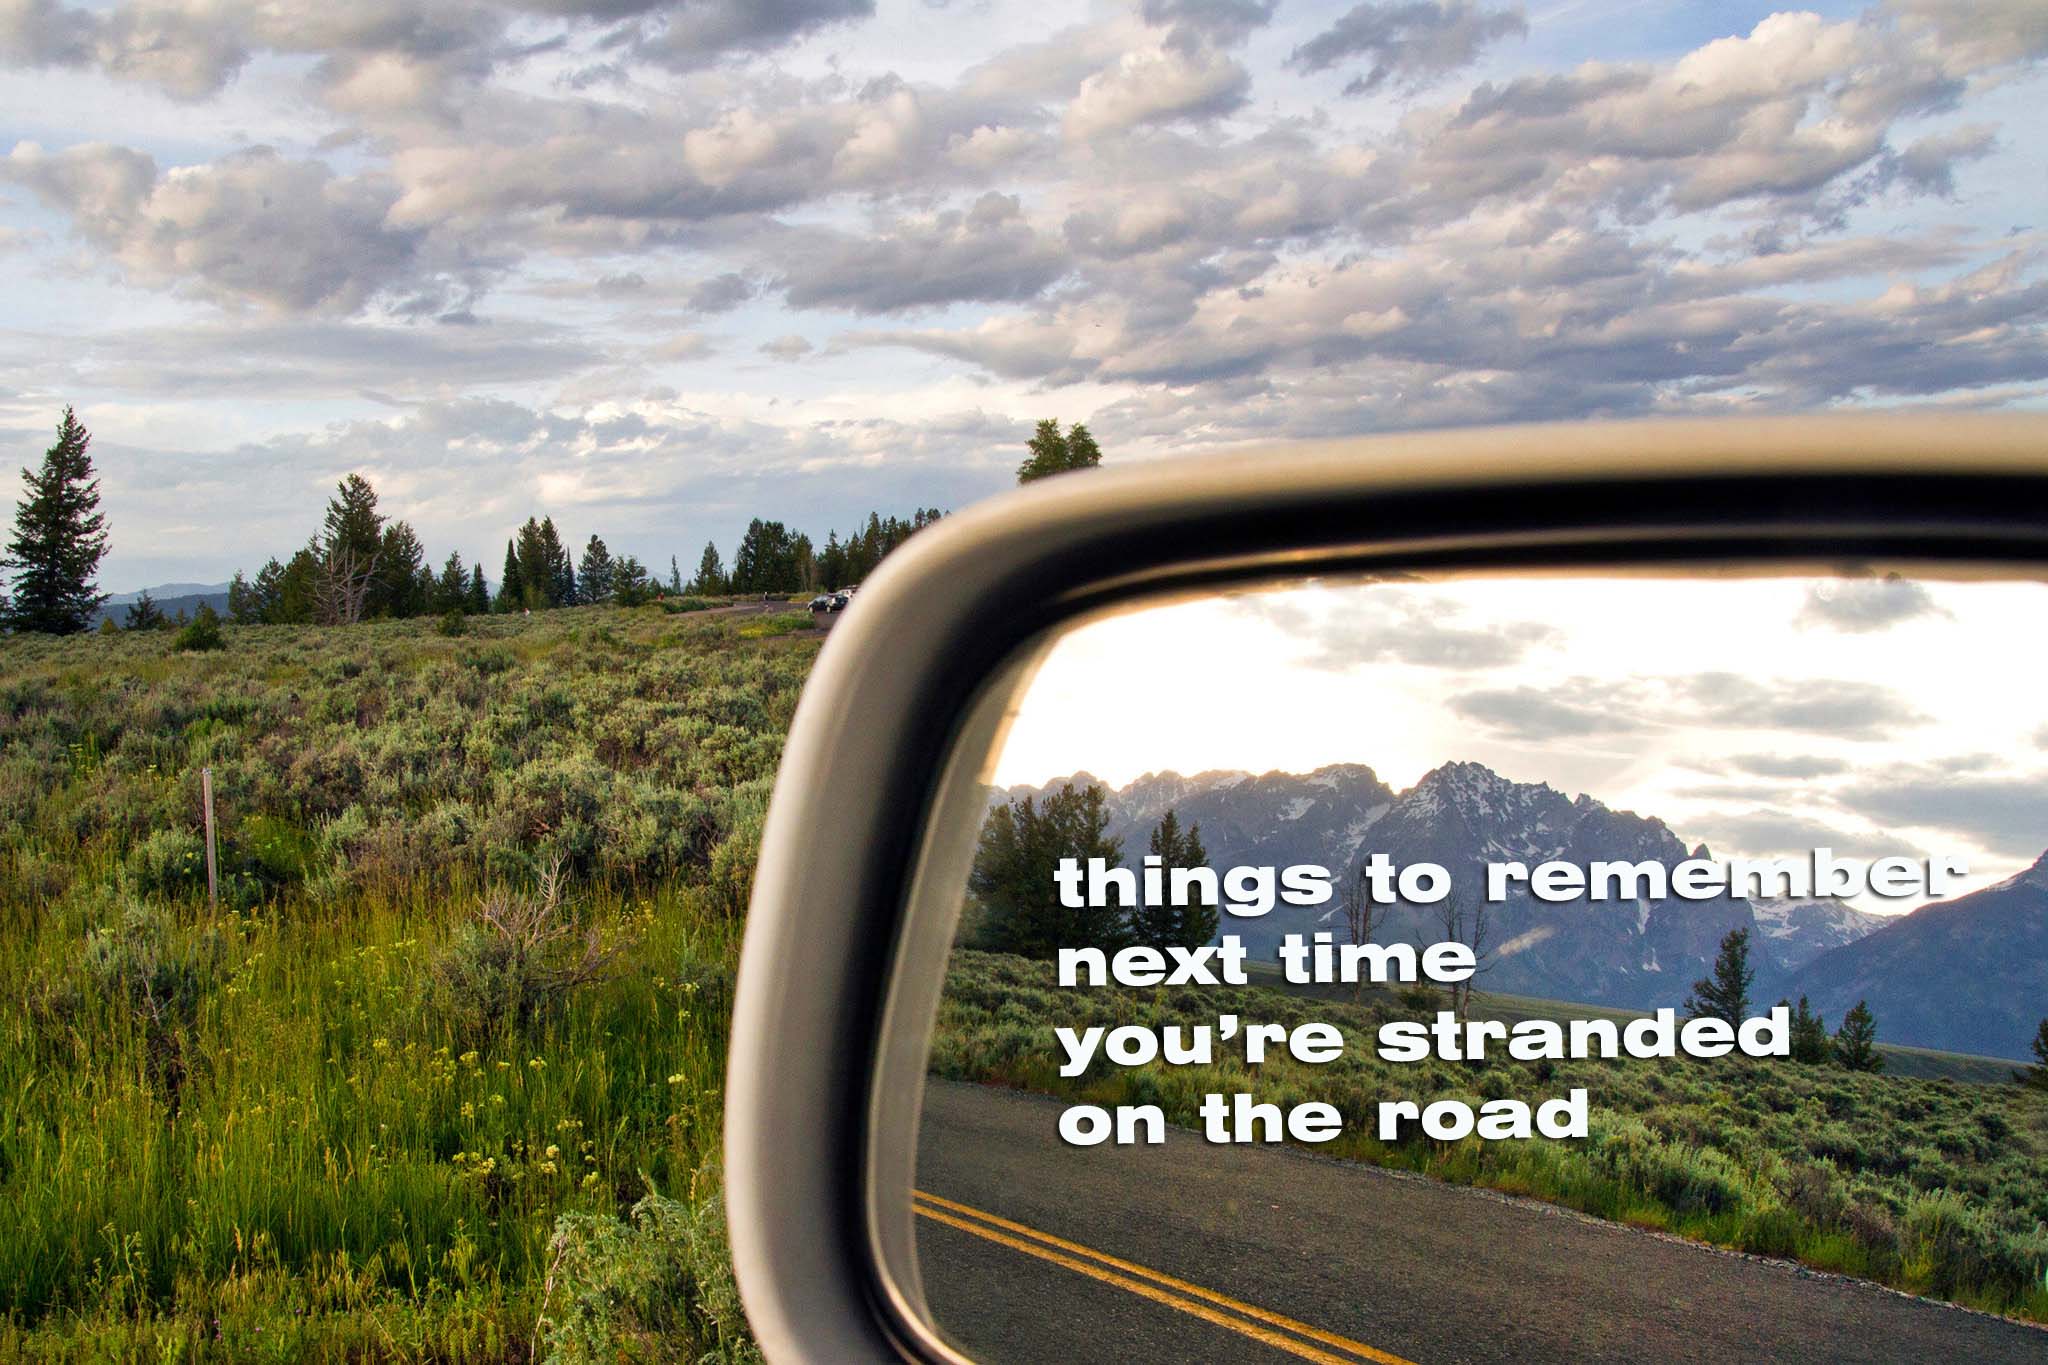 20 things to remember next time you’re stranded on the road